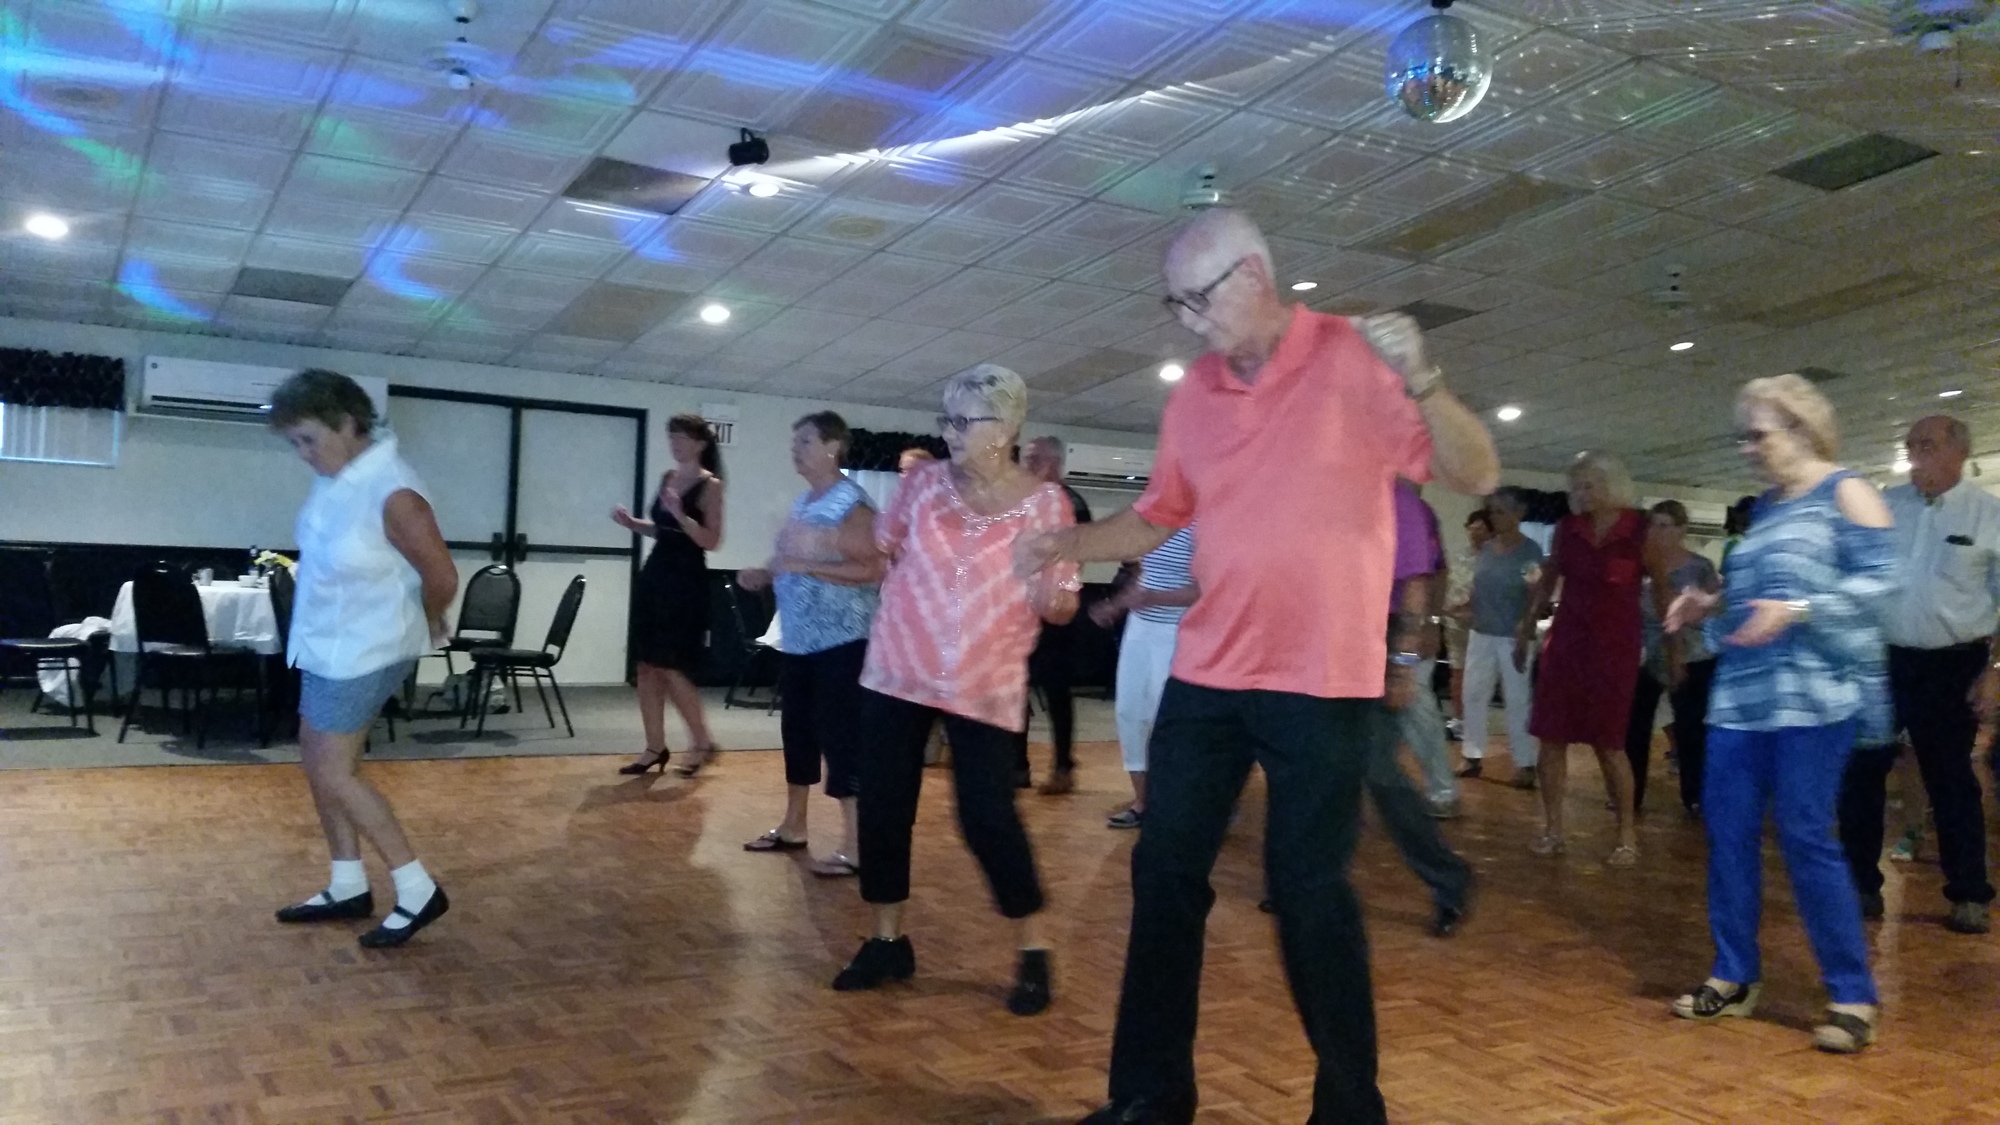 Columbian Club members Kit Schiller, Rose Rowe and Rich Rowe line dance during the fundraiser. Photo courtesy of Kit Schiller